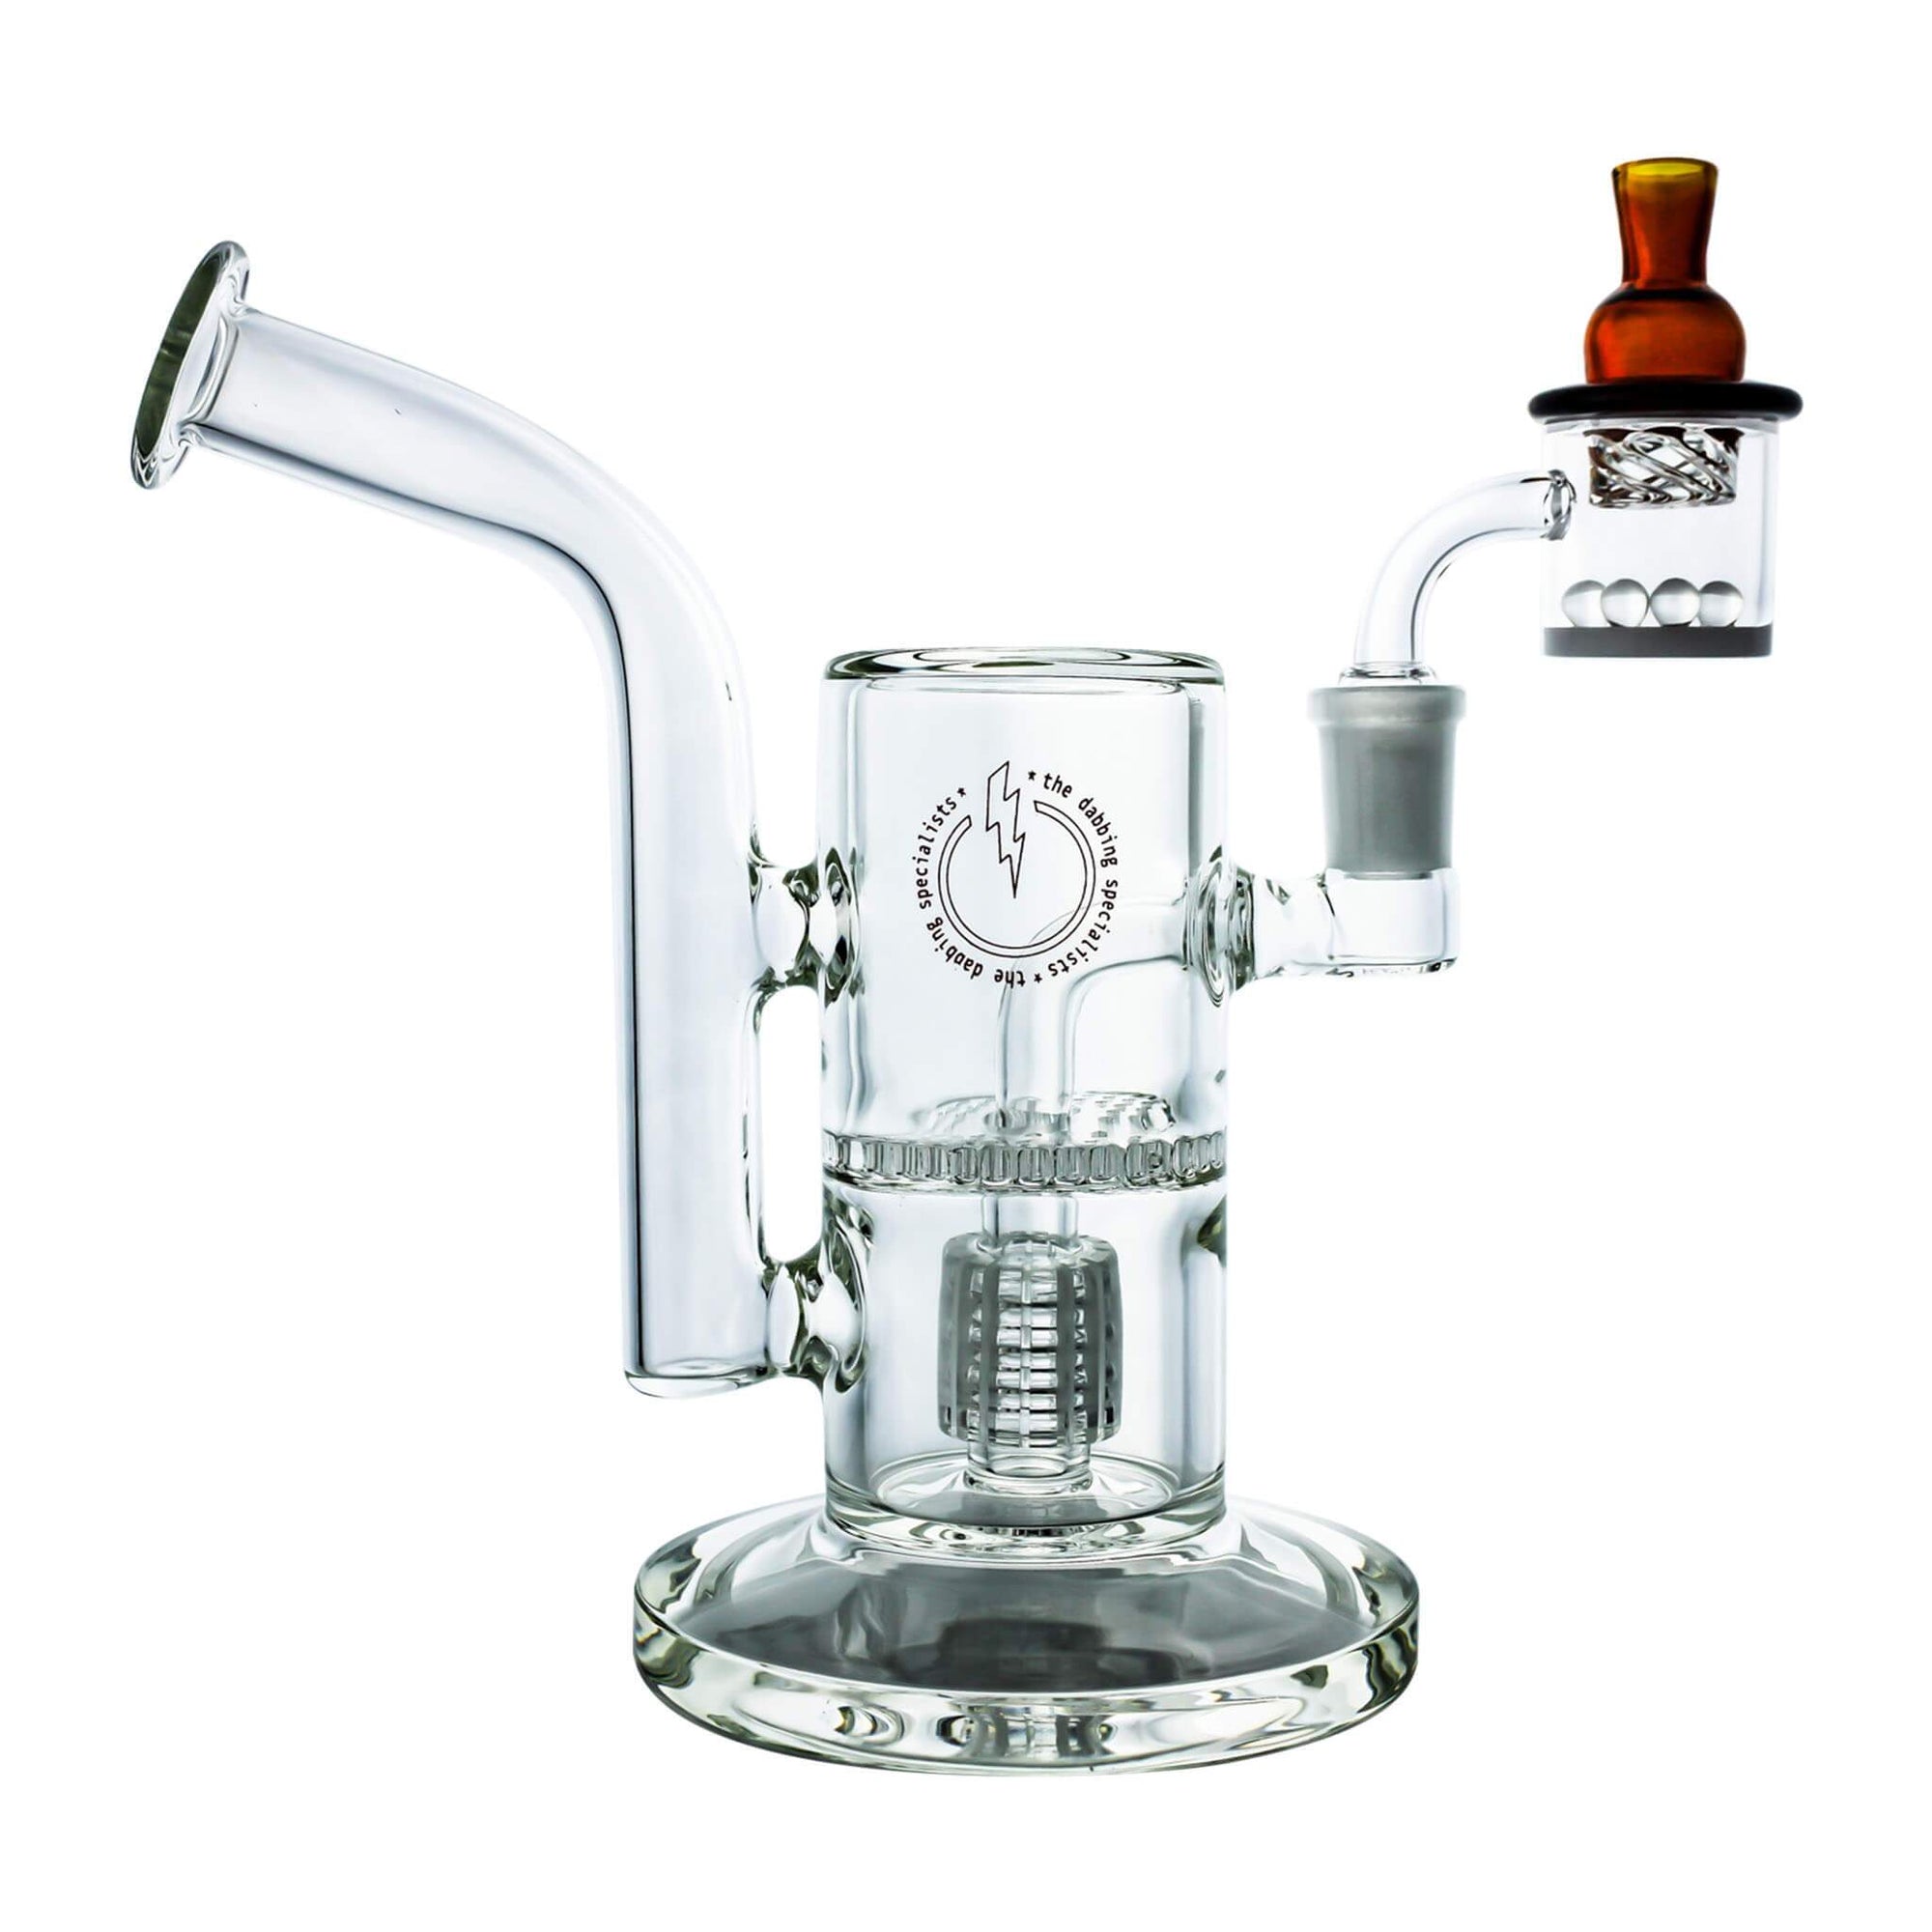 30mm Complete Dabbing Kit #7 | Whole Dab Kit View | the dabbing specialists